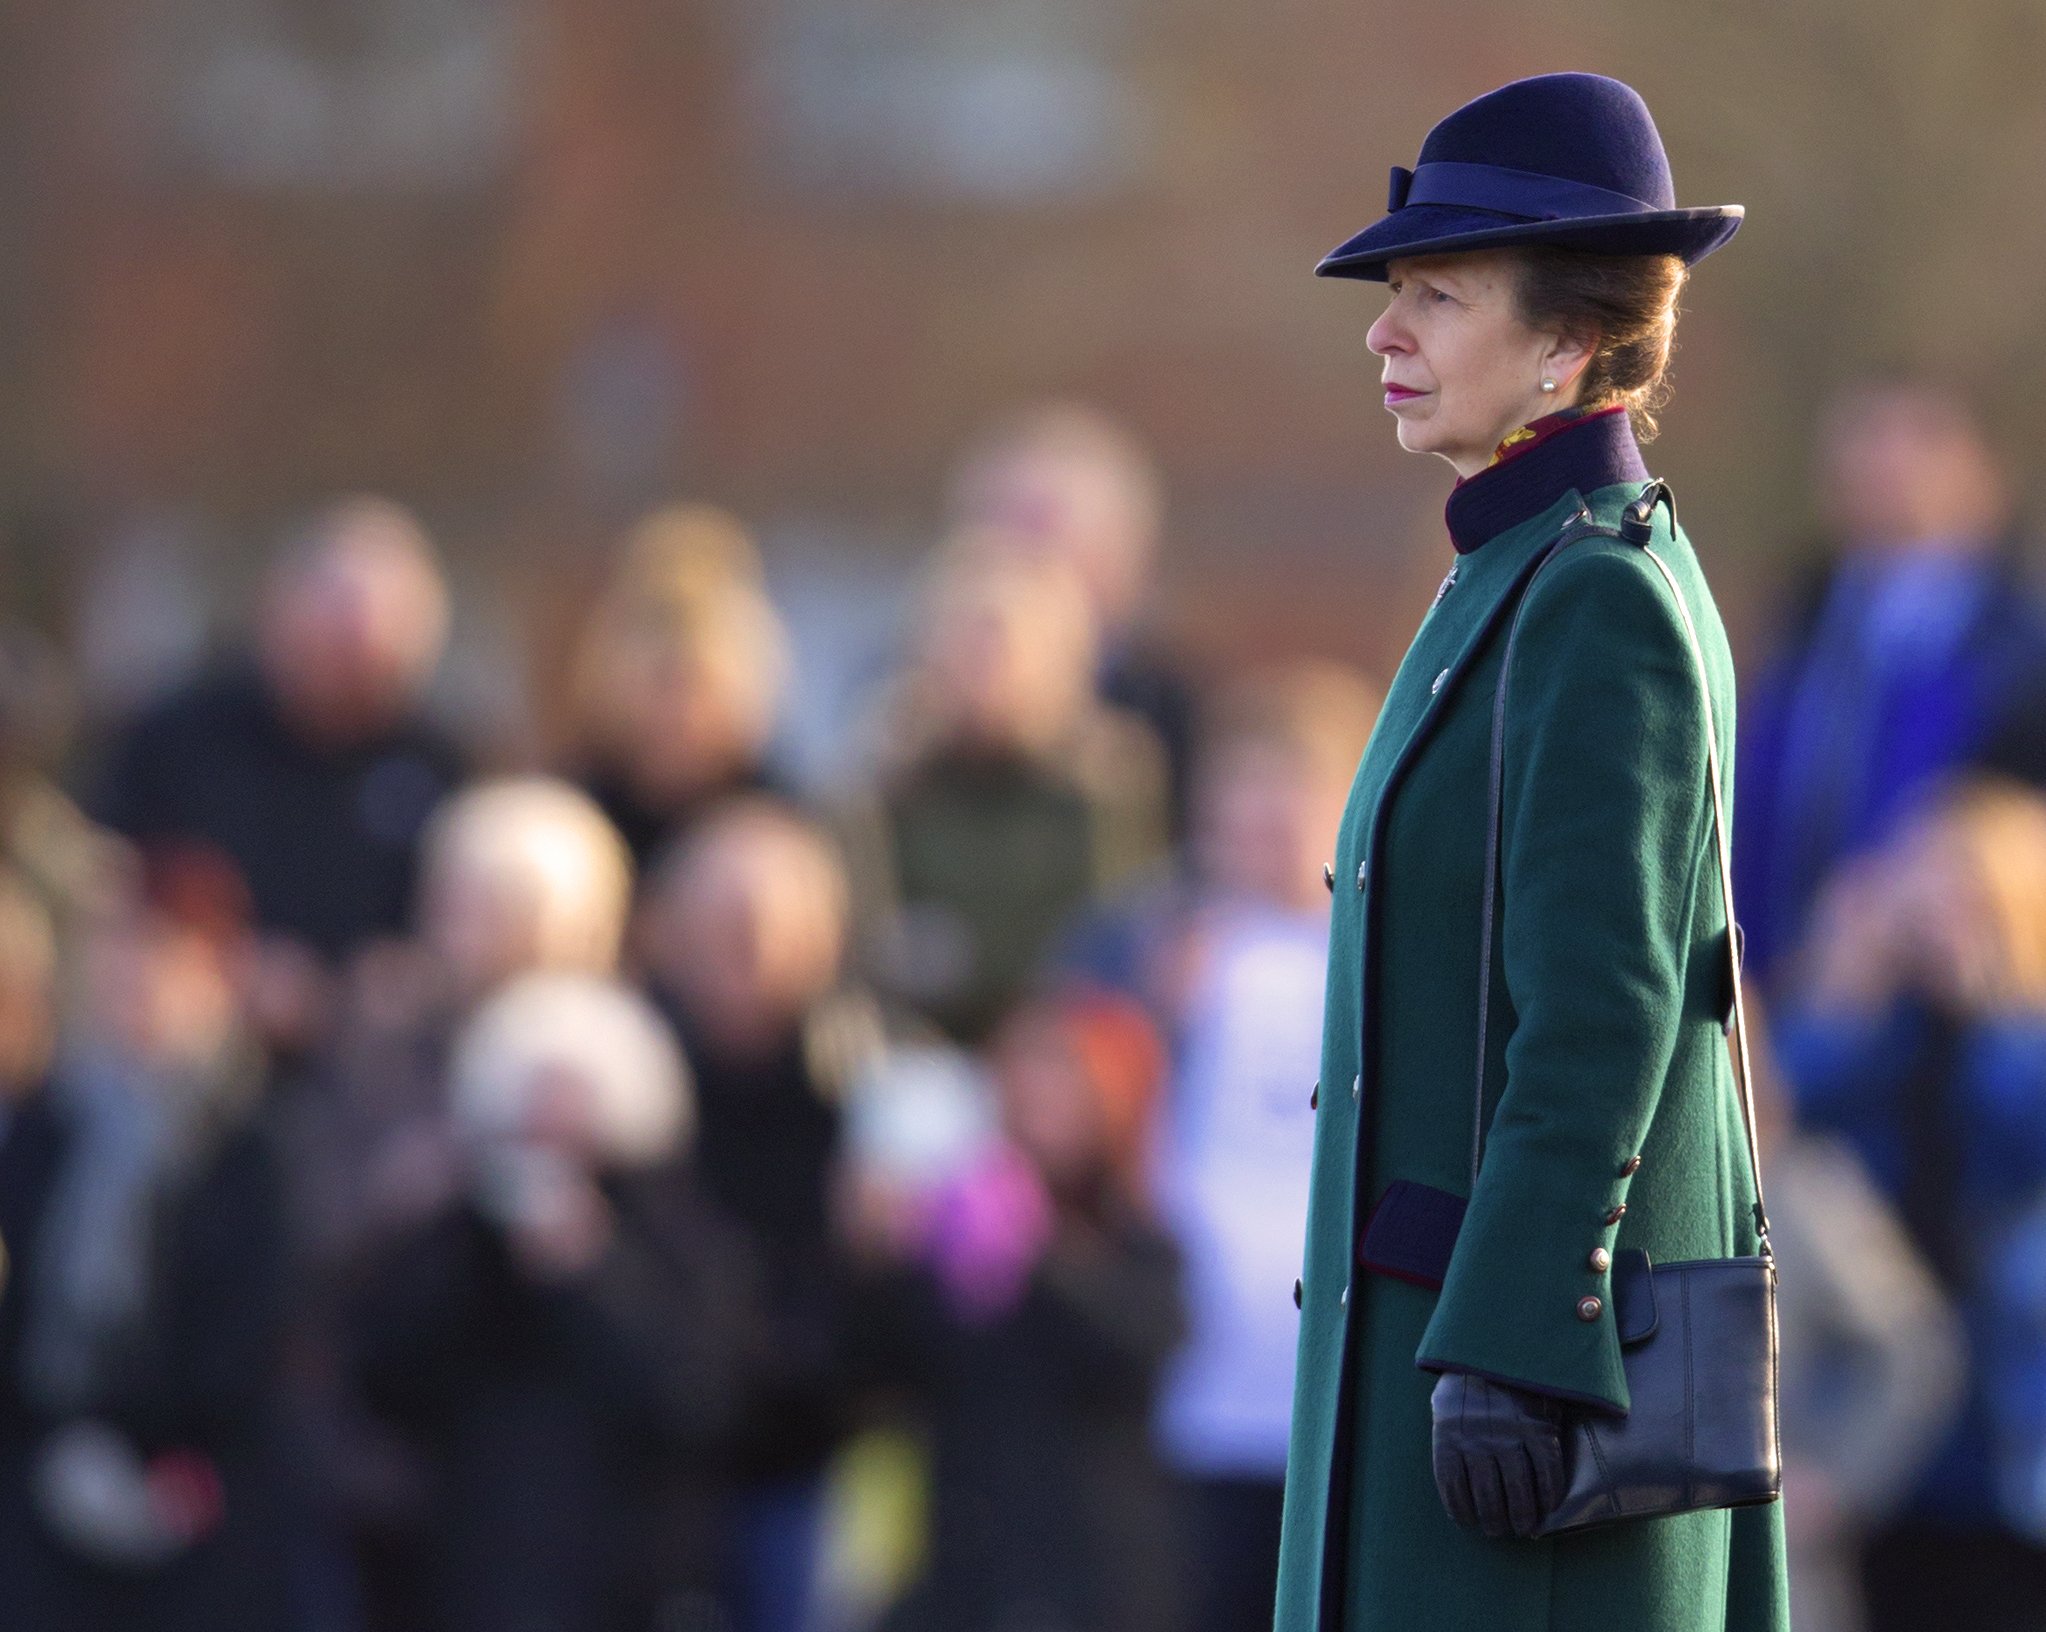 Princess Anne, The Princess Royal (in her role as Colonel-in-Chief of the King's Royal Hussars) takes the salute after presenting the Afghanistan Operational Service Medals to soldiers of the King's Royal Hussars at Aliwal Barracks on December 04, 2012 in Tidworth, England |  Source: Getty Images 